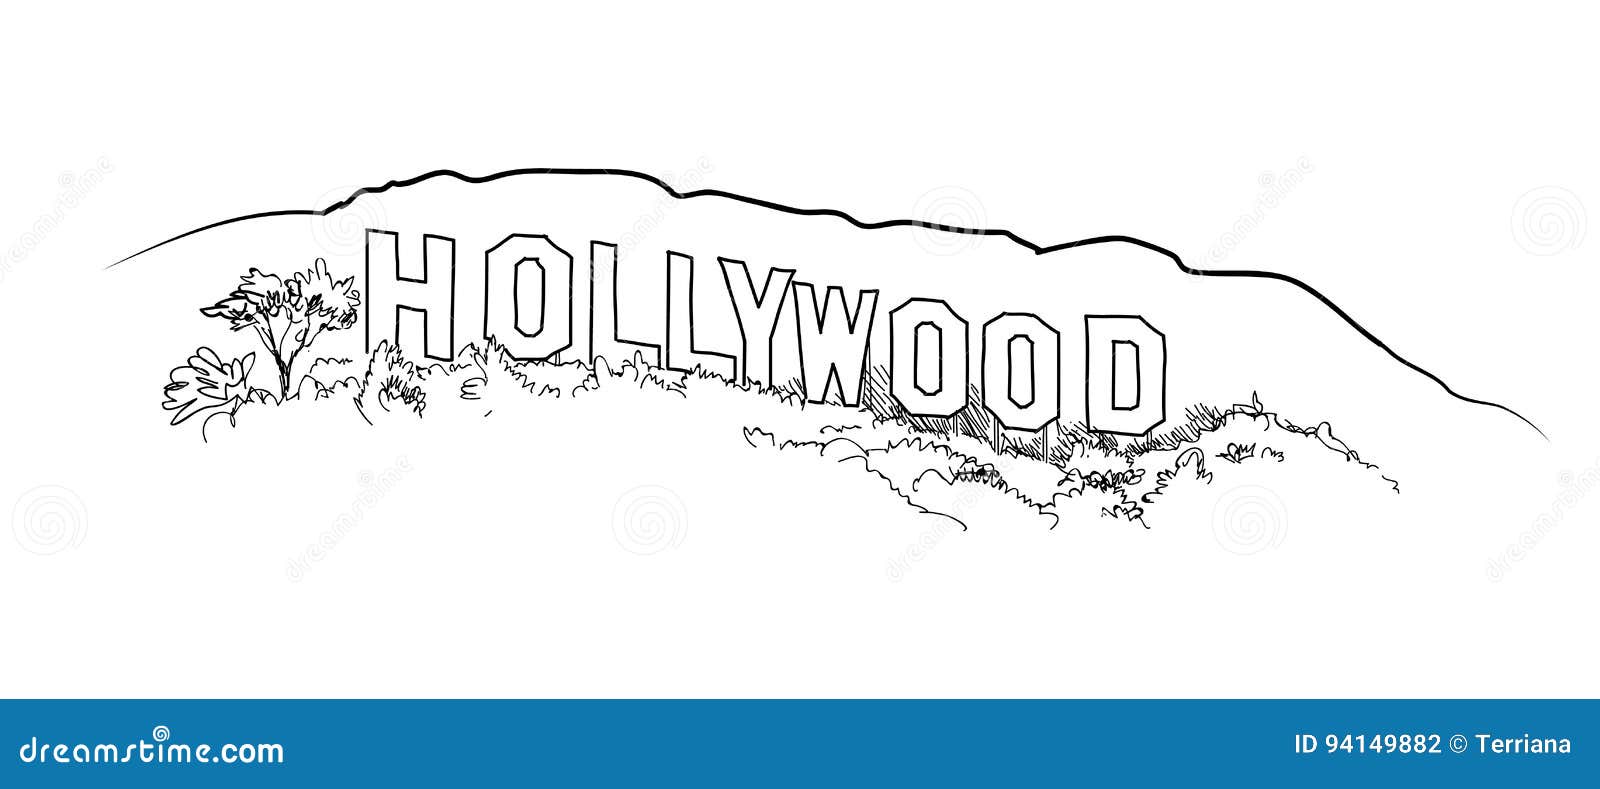 Hollywood Sign Engraving. Hollywood Hill Landscape View